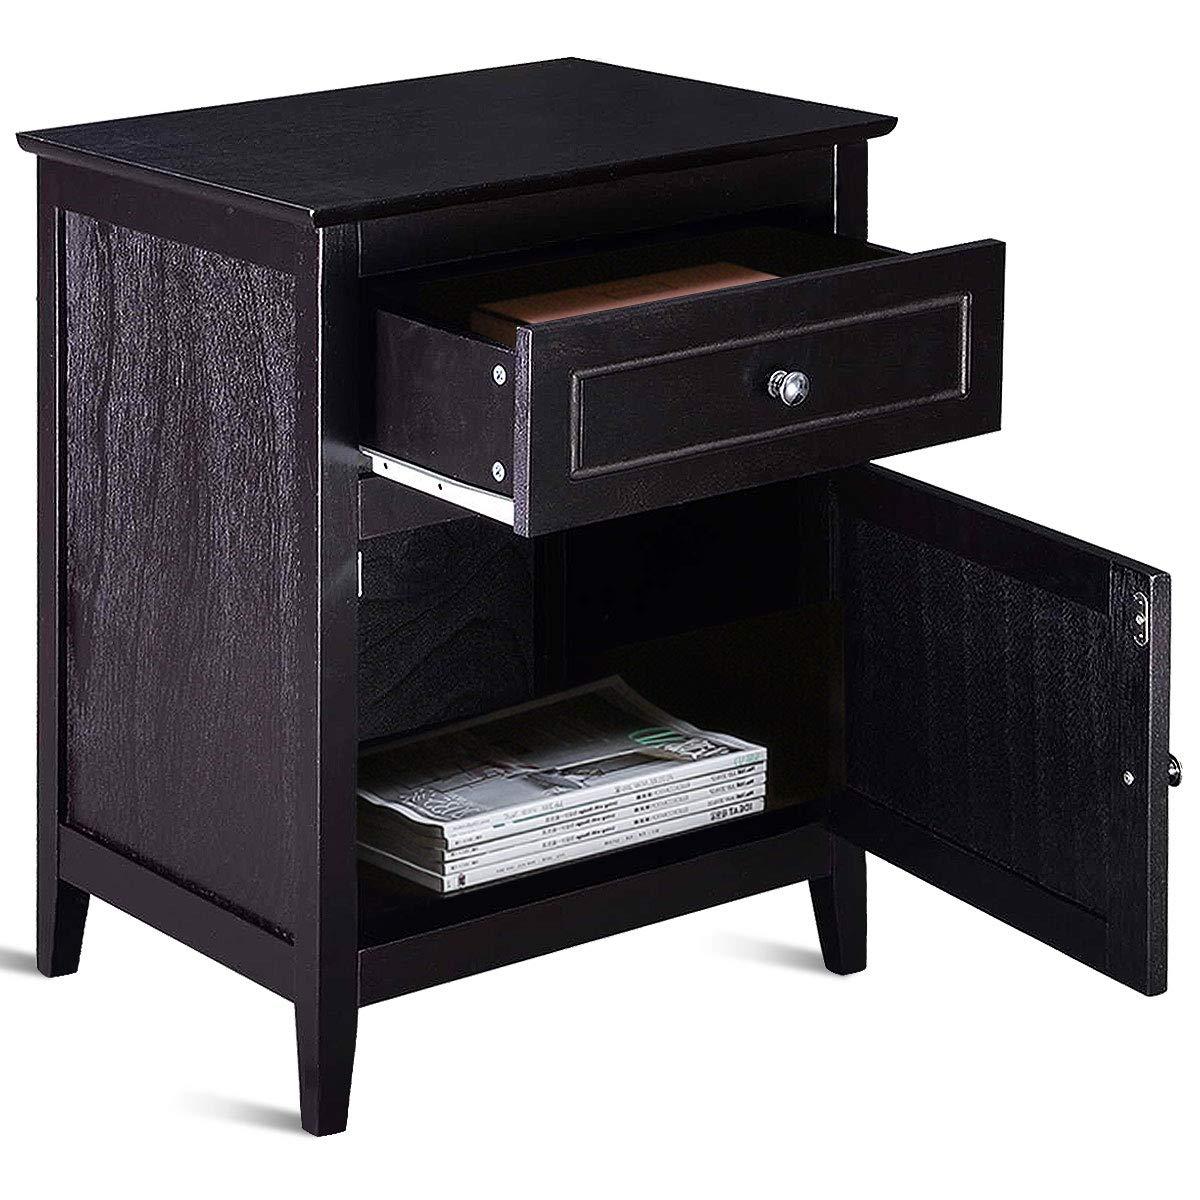 Giantex Wooden End Table with Drawer and Cabinet Bedside Sofa Table for Living Room, Bedroom